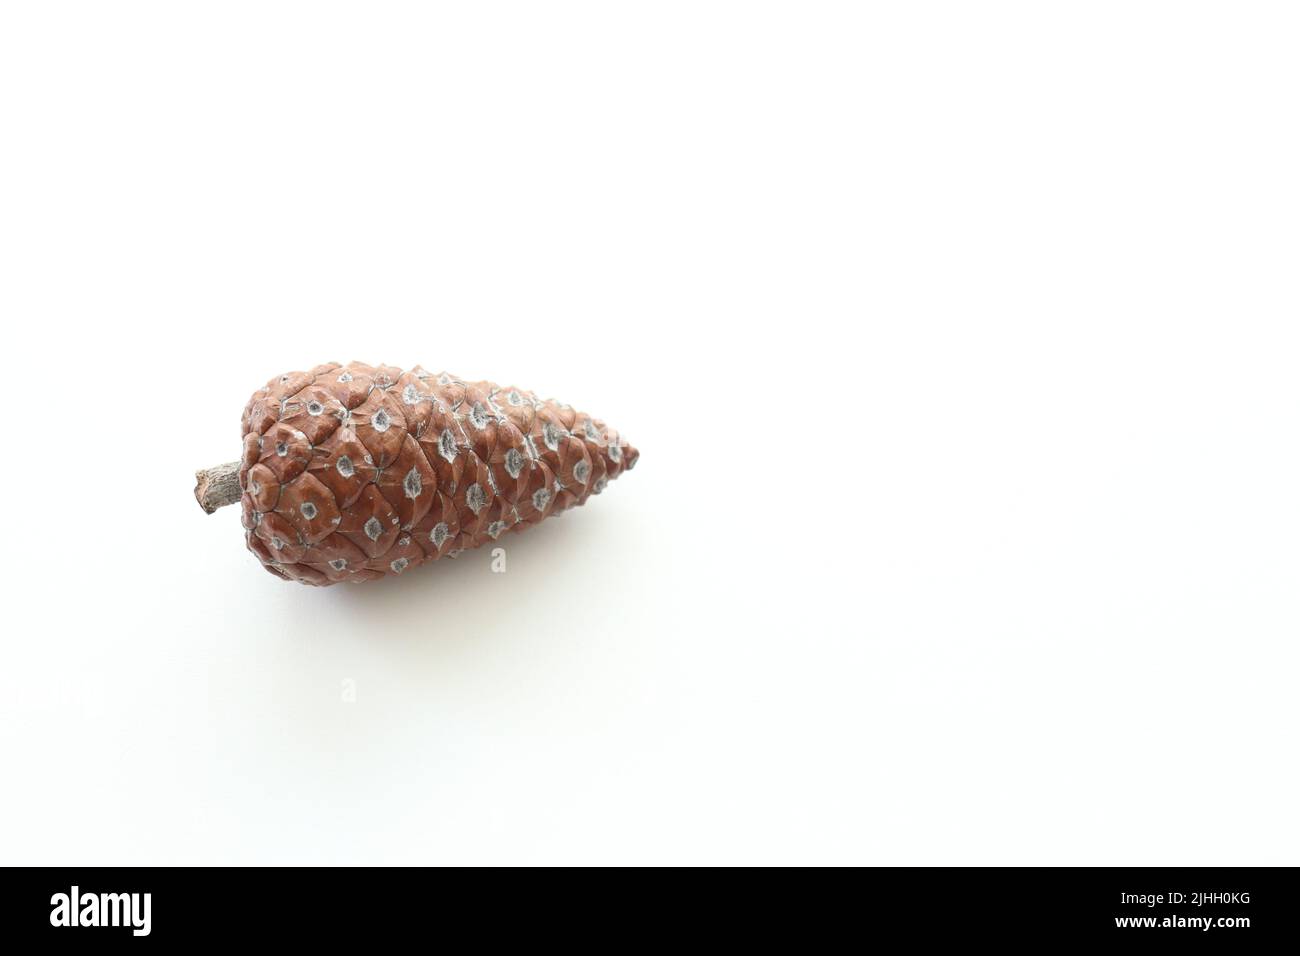 Pine cone, pine cone is isolated on white background. Copy space, space for text. Top view photo. No people, nobody. Tree seed idea concept. Stock Photo